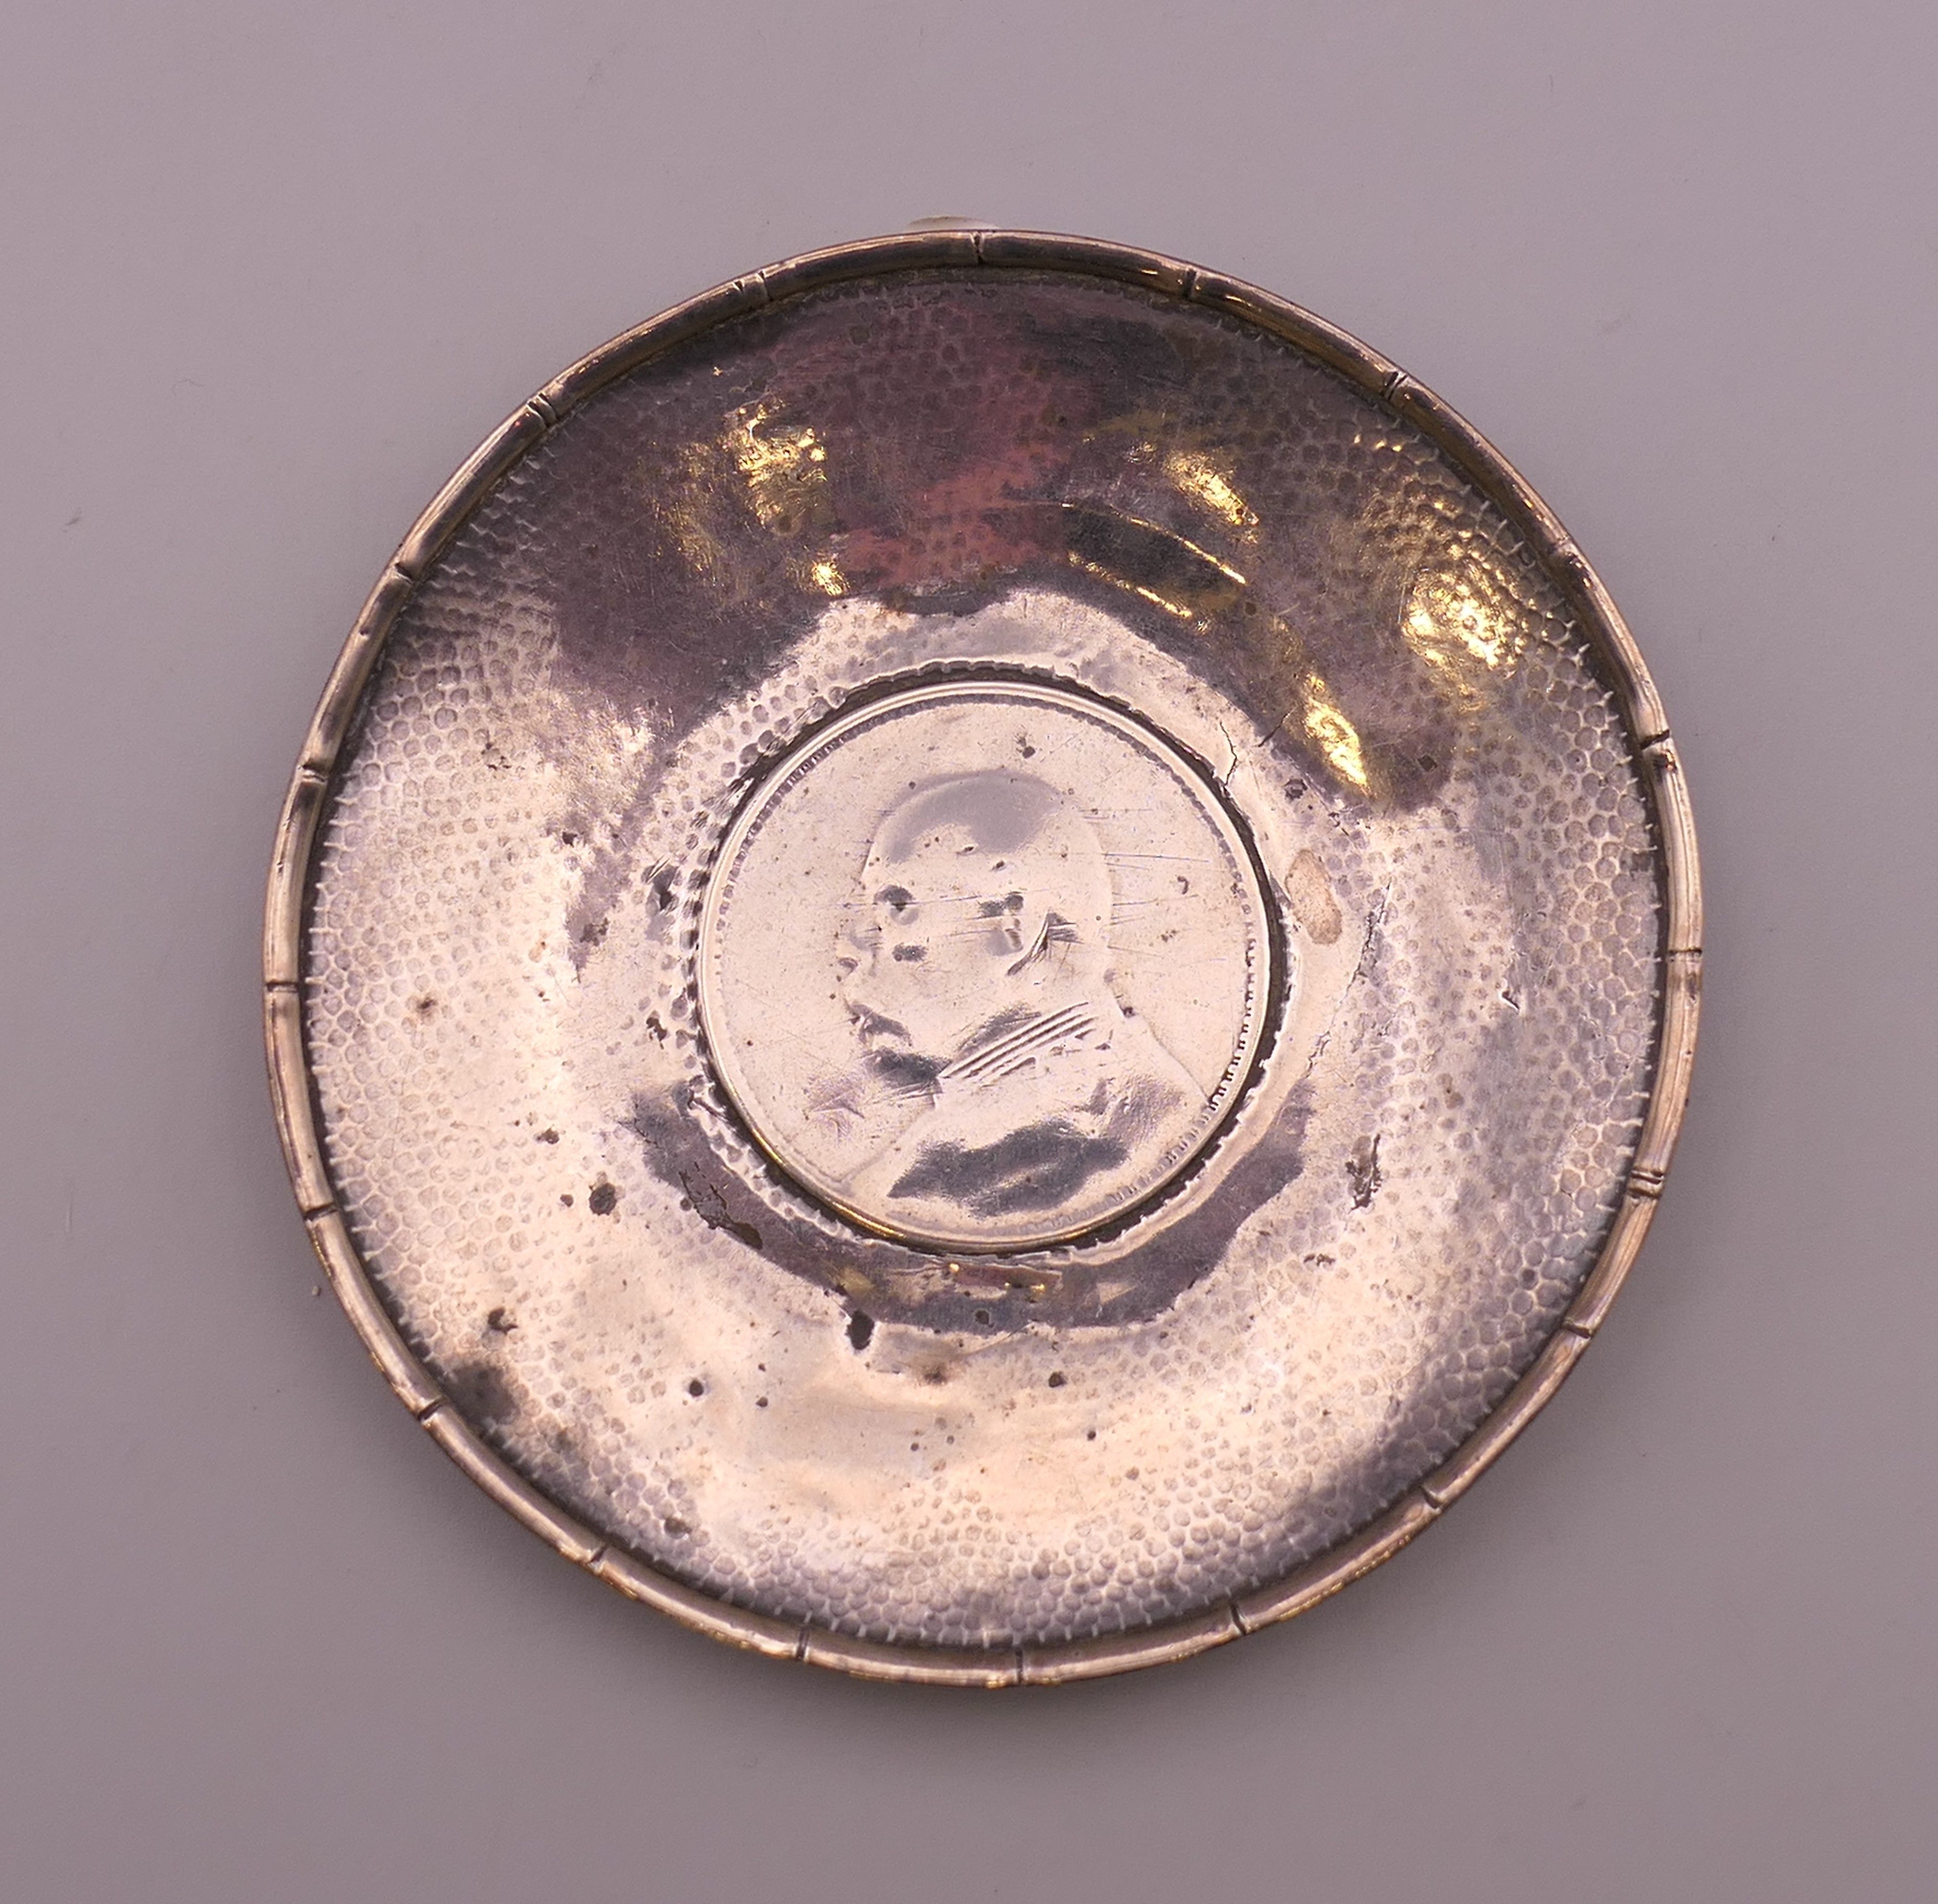 Two Chinese silver dishes inset with coins. 9.5 cm diameter. 117.9 grammes total weight. - Image 4 of 5